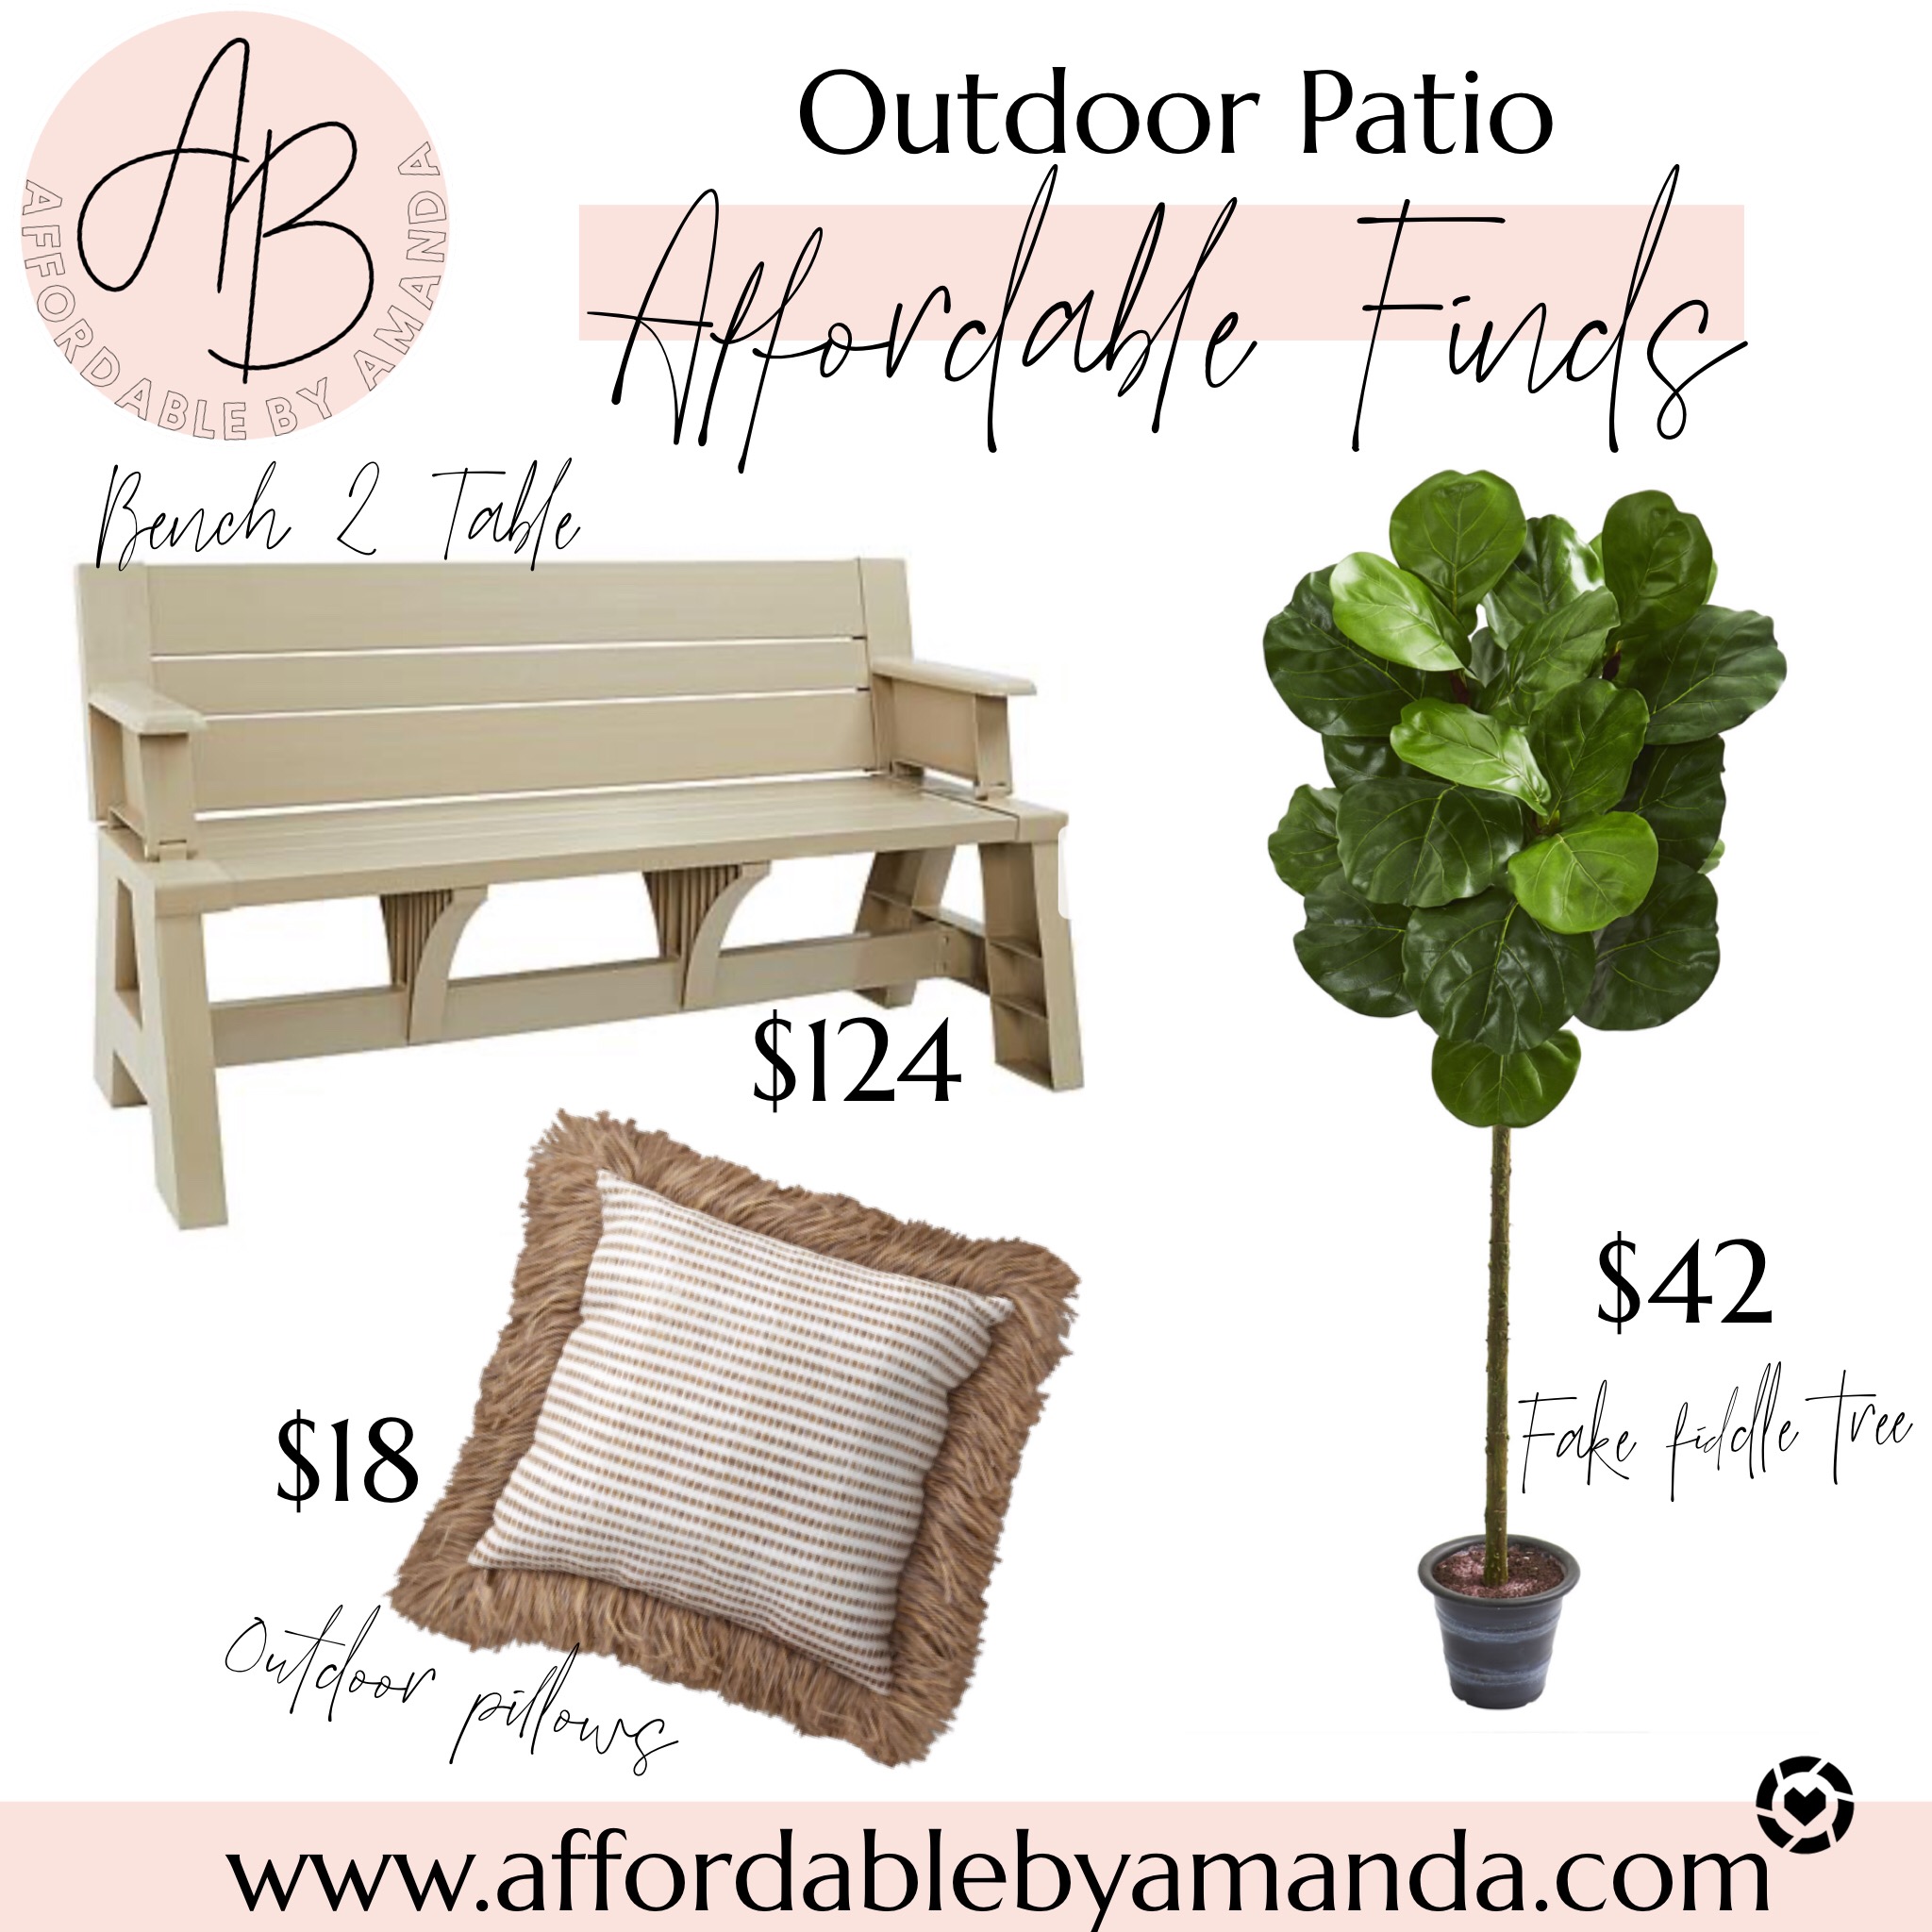 5 Outdoor Patio Upgrades to Make This Spring Affordable Finds | Affordable by Amanda 